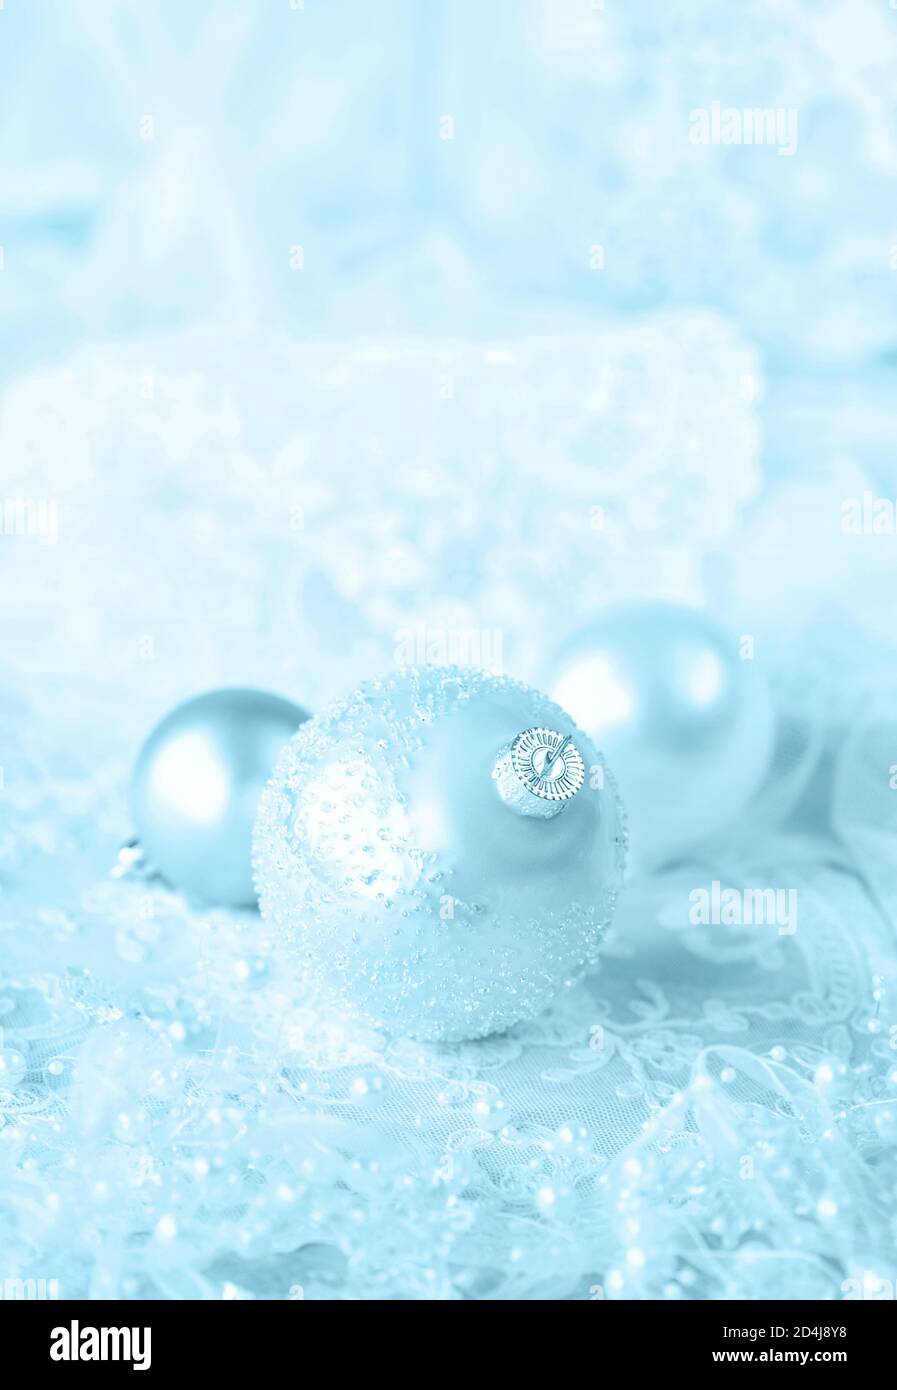 Beautiful Christmas decoration in white and blue colors: several Christmas balls with white ribbon and pearls on a light lacy background; vertical ima Stock Photo